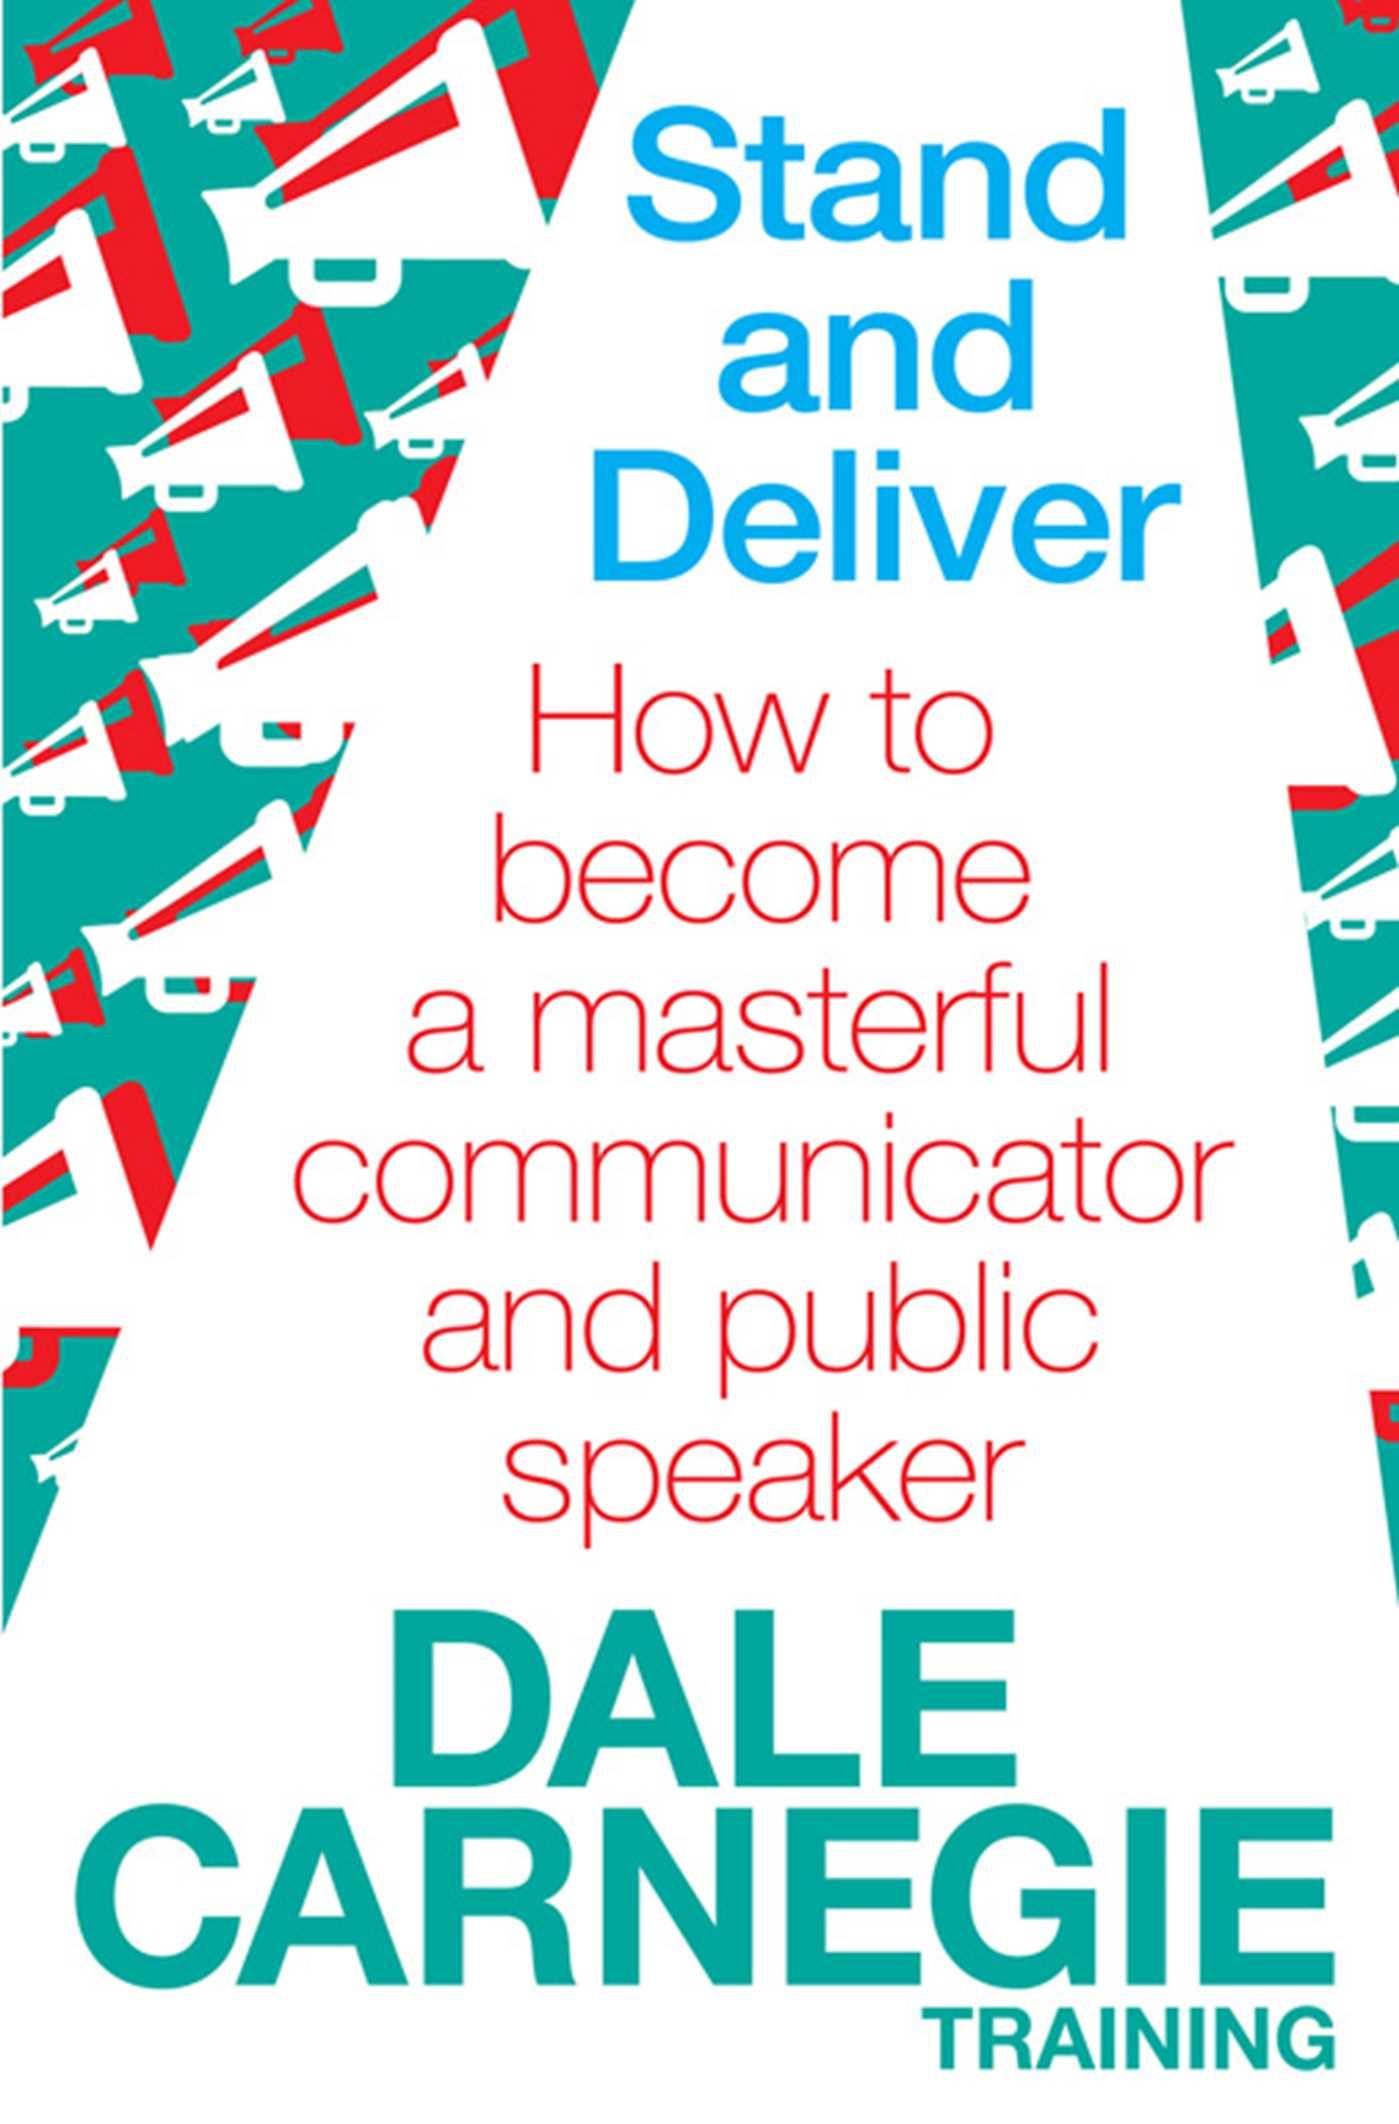 Stand and Deliver / How to become a masterful communicator and public speaker / Dale Carnegie Training / Taschenbuch / 241 S. / Englisch / 2011 / Simon & Schuster Ltd / EAN 9780857206763 - Carnegie Training, Dale